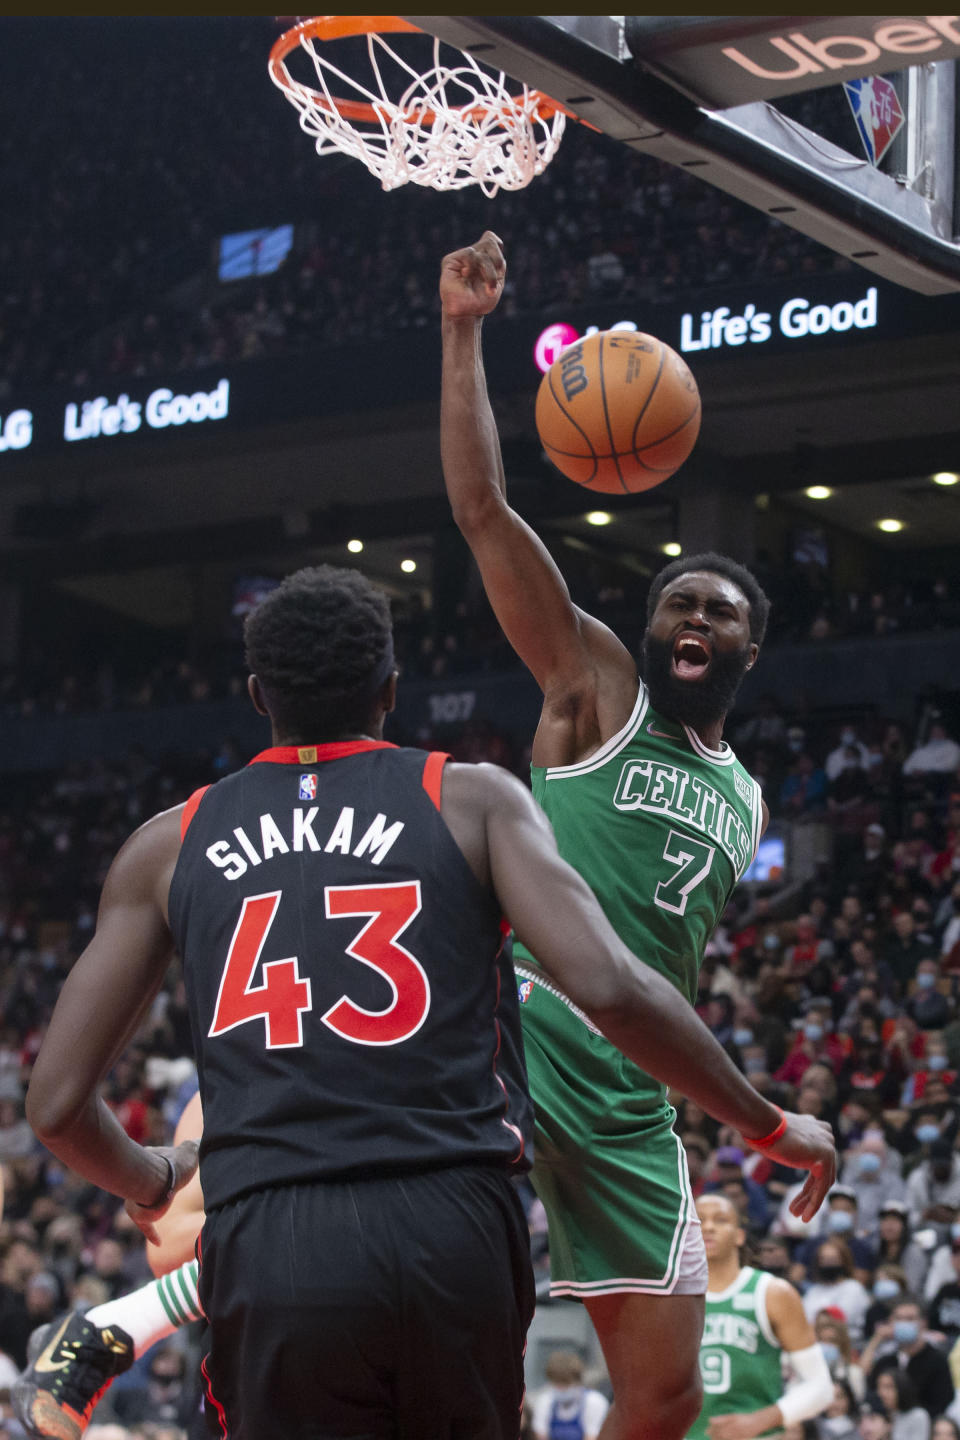 Boston Celtics' Jaylen Brown, right, scores as Toronto Raptors' Pascal Siakam looks on during the first half of an NBA basketball game in Toronto, Sunday, Nov. 28, 2021. (Chris Young/The Canadian Press via AP)